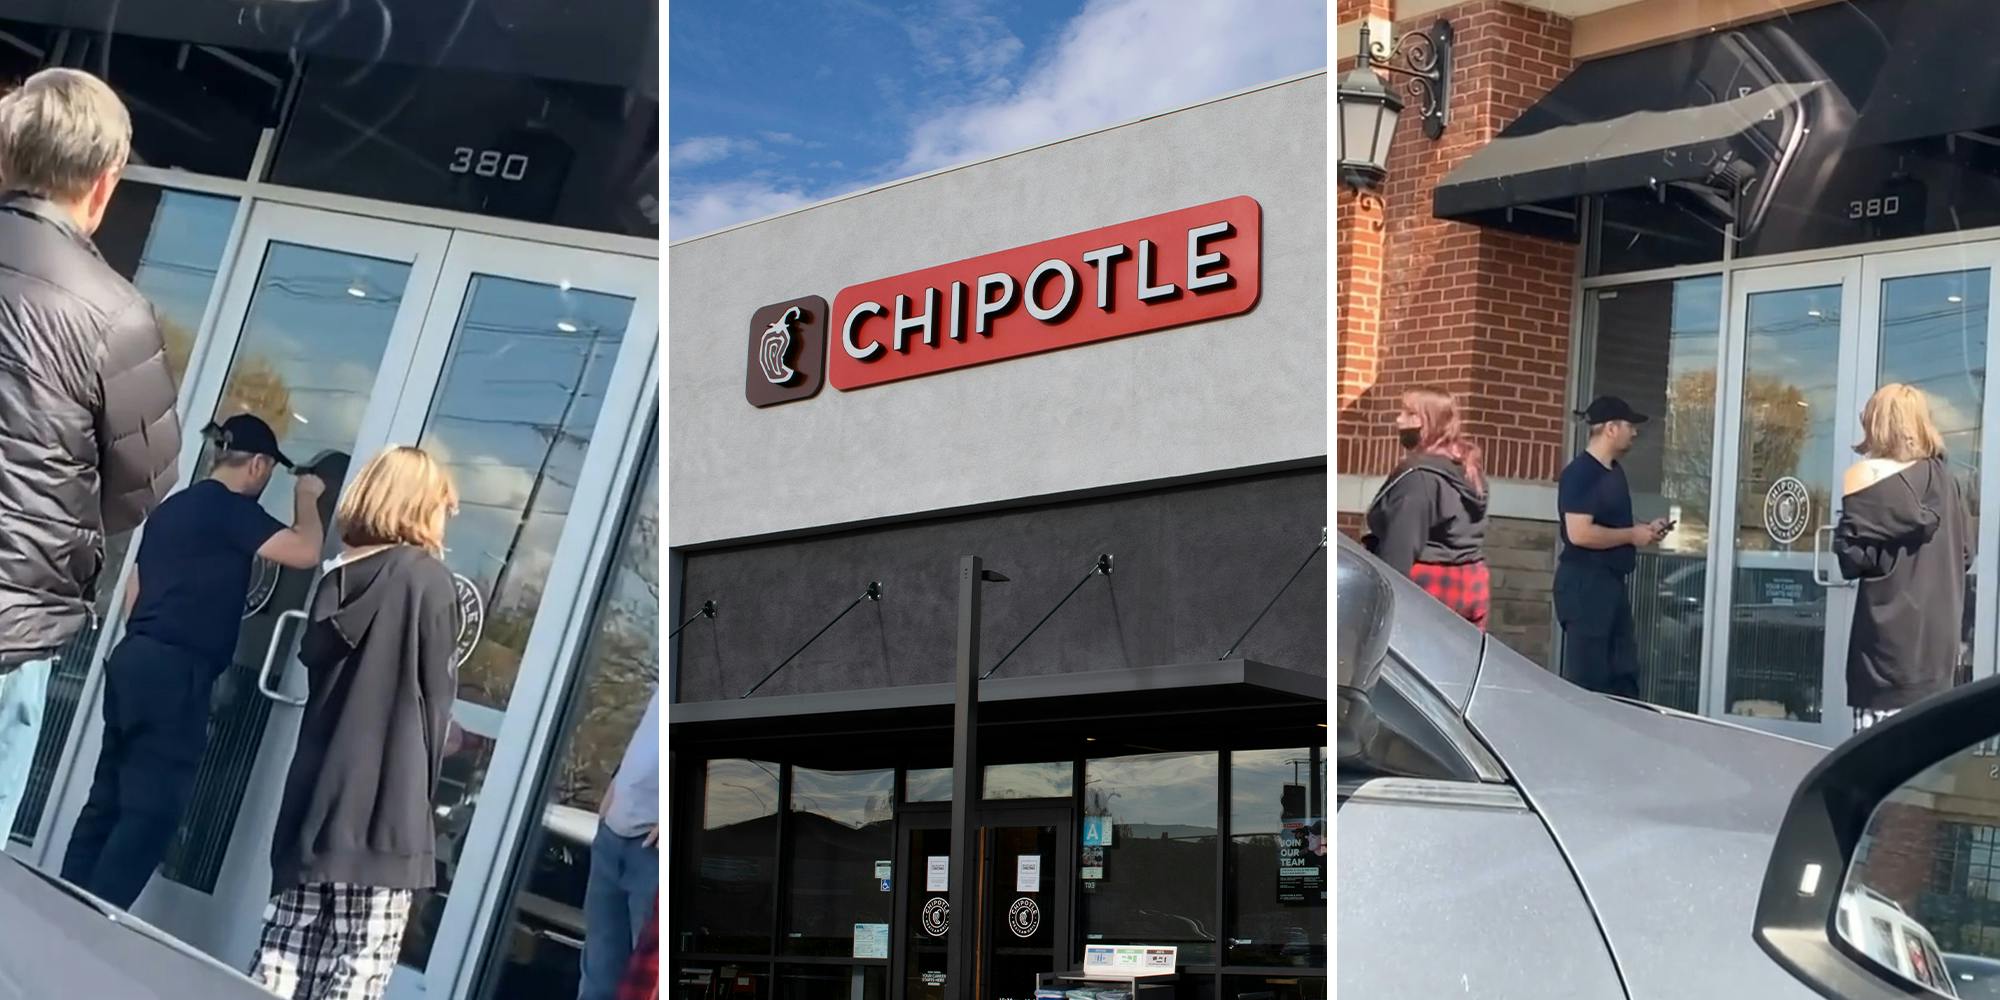 ‘I’ve never seen so many people waiting for Chipotle at 10am’: Over-eager Chipotle customers mocked for waiting for restaurant to open in morning